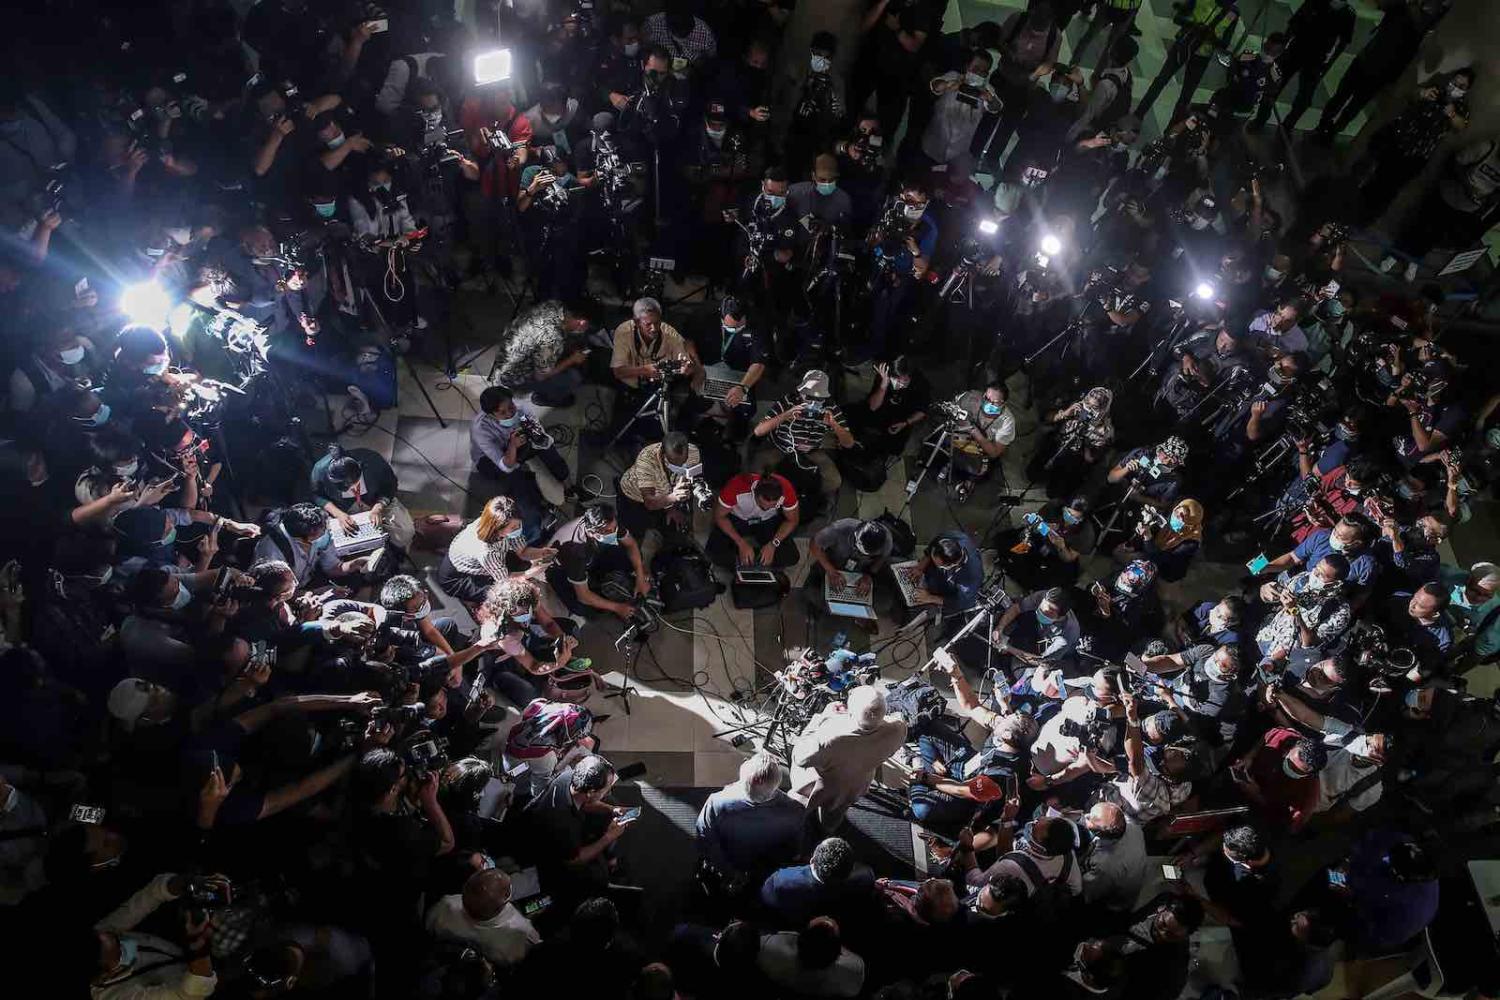 Malaysia's former prime minister Najib Razak (bottom at centre) speaks to the media after he was found guilty in his corruption trial in Kuala Lumpur last week (Fazry Isamil/AFP/Getty Images)